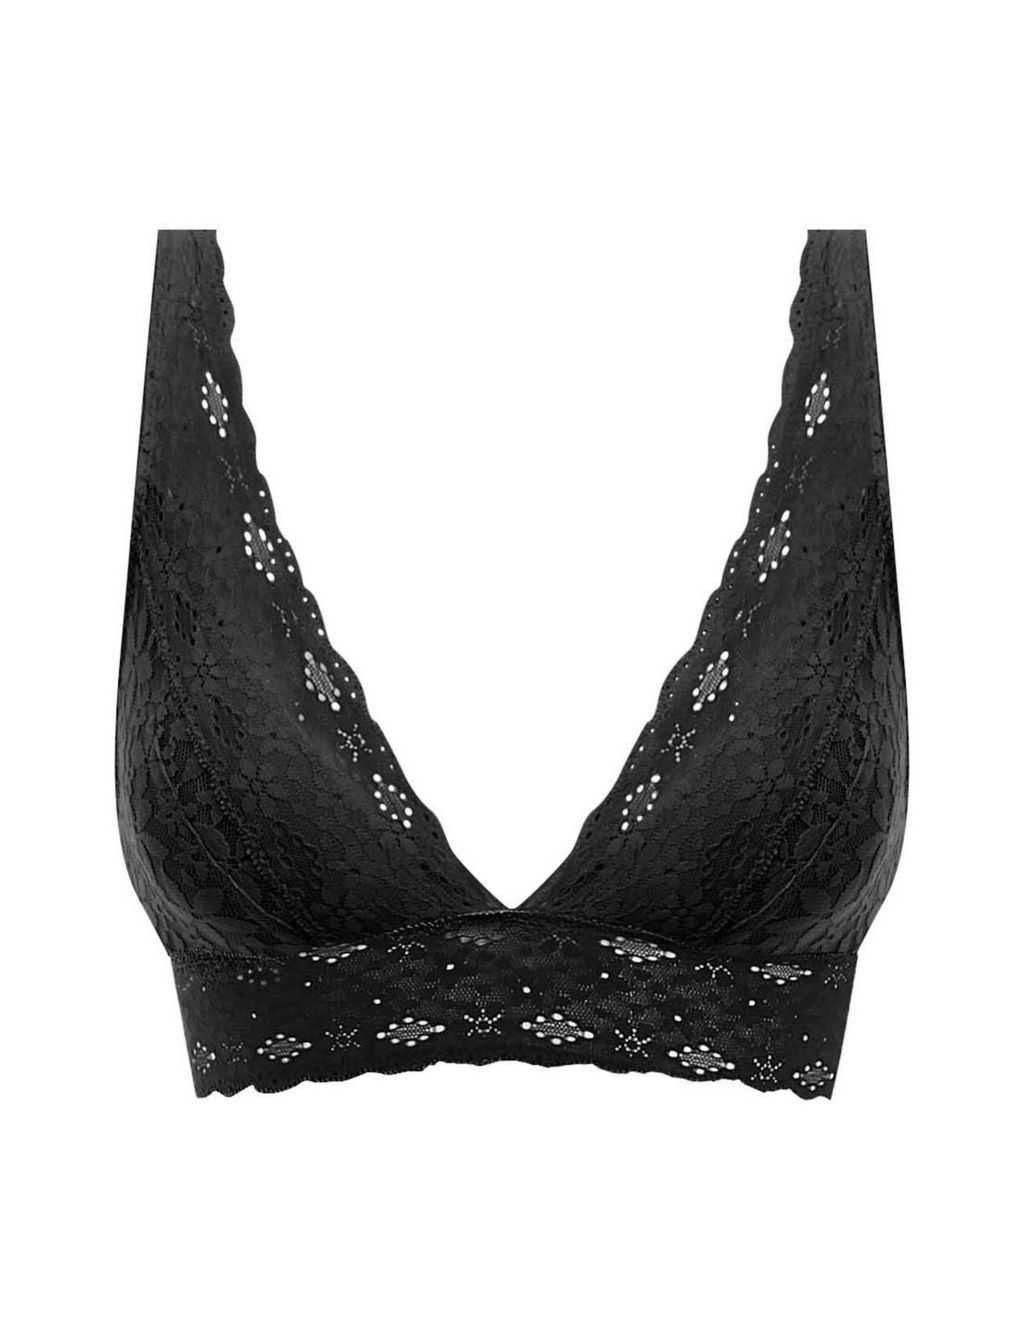 Halo Floral Lace Non Wired Plunge Bra | Wacoal | M&S